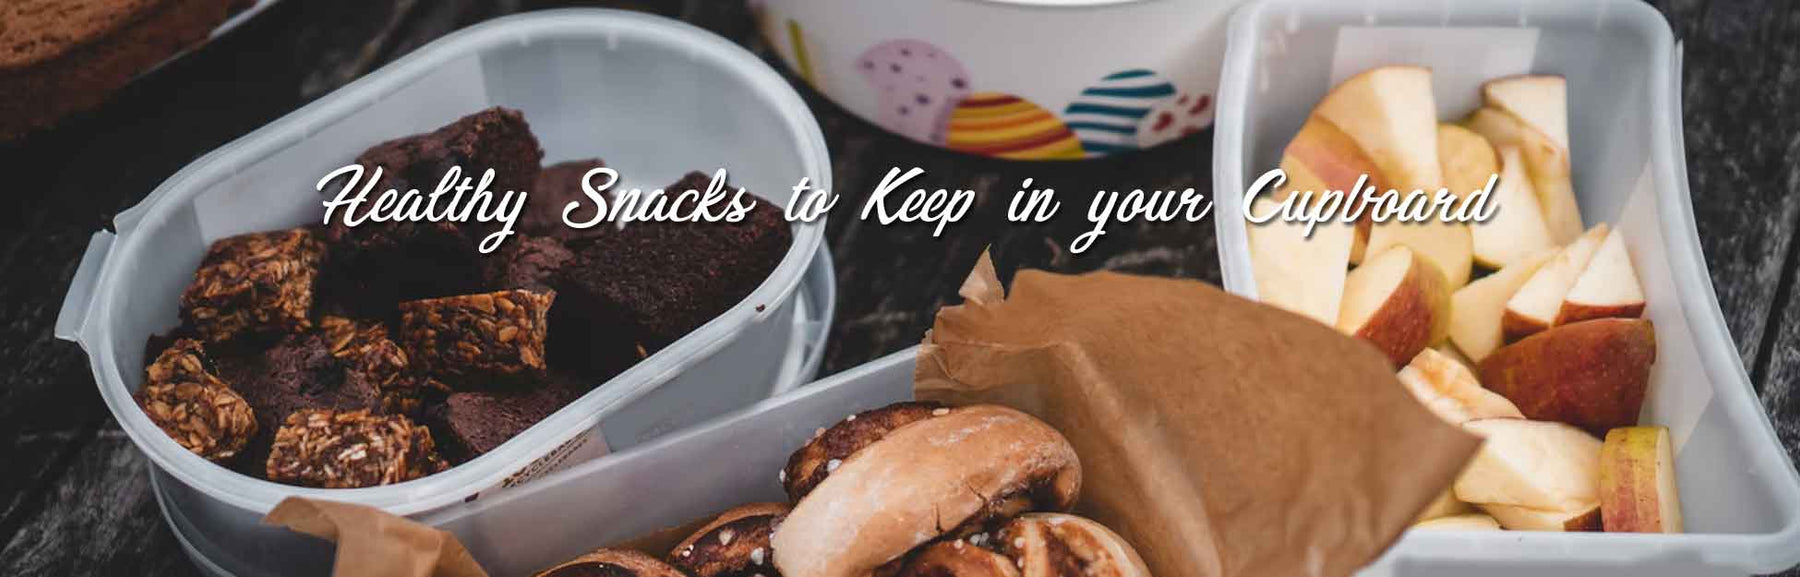 Healthy Snacks to Keep in your Cupboard